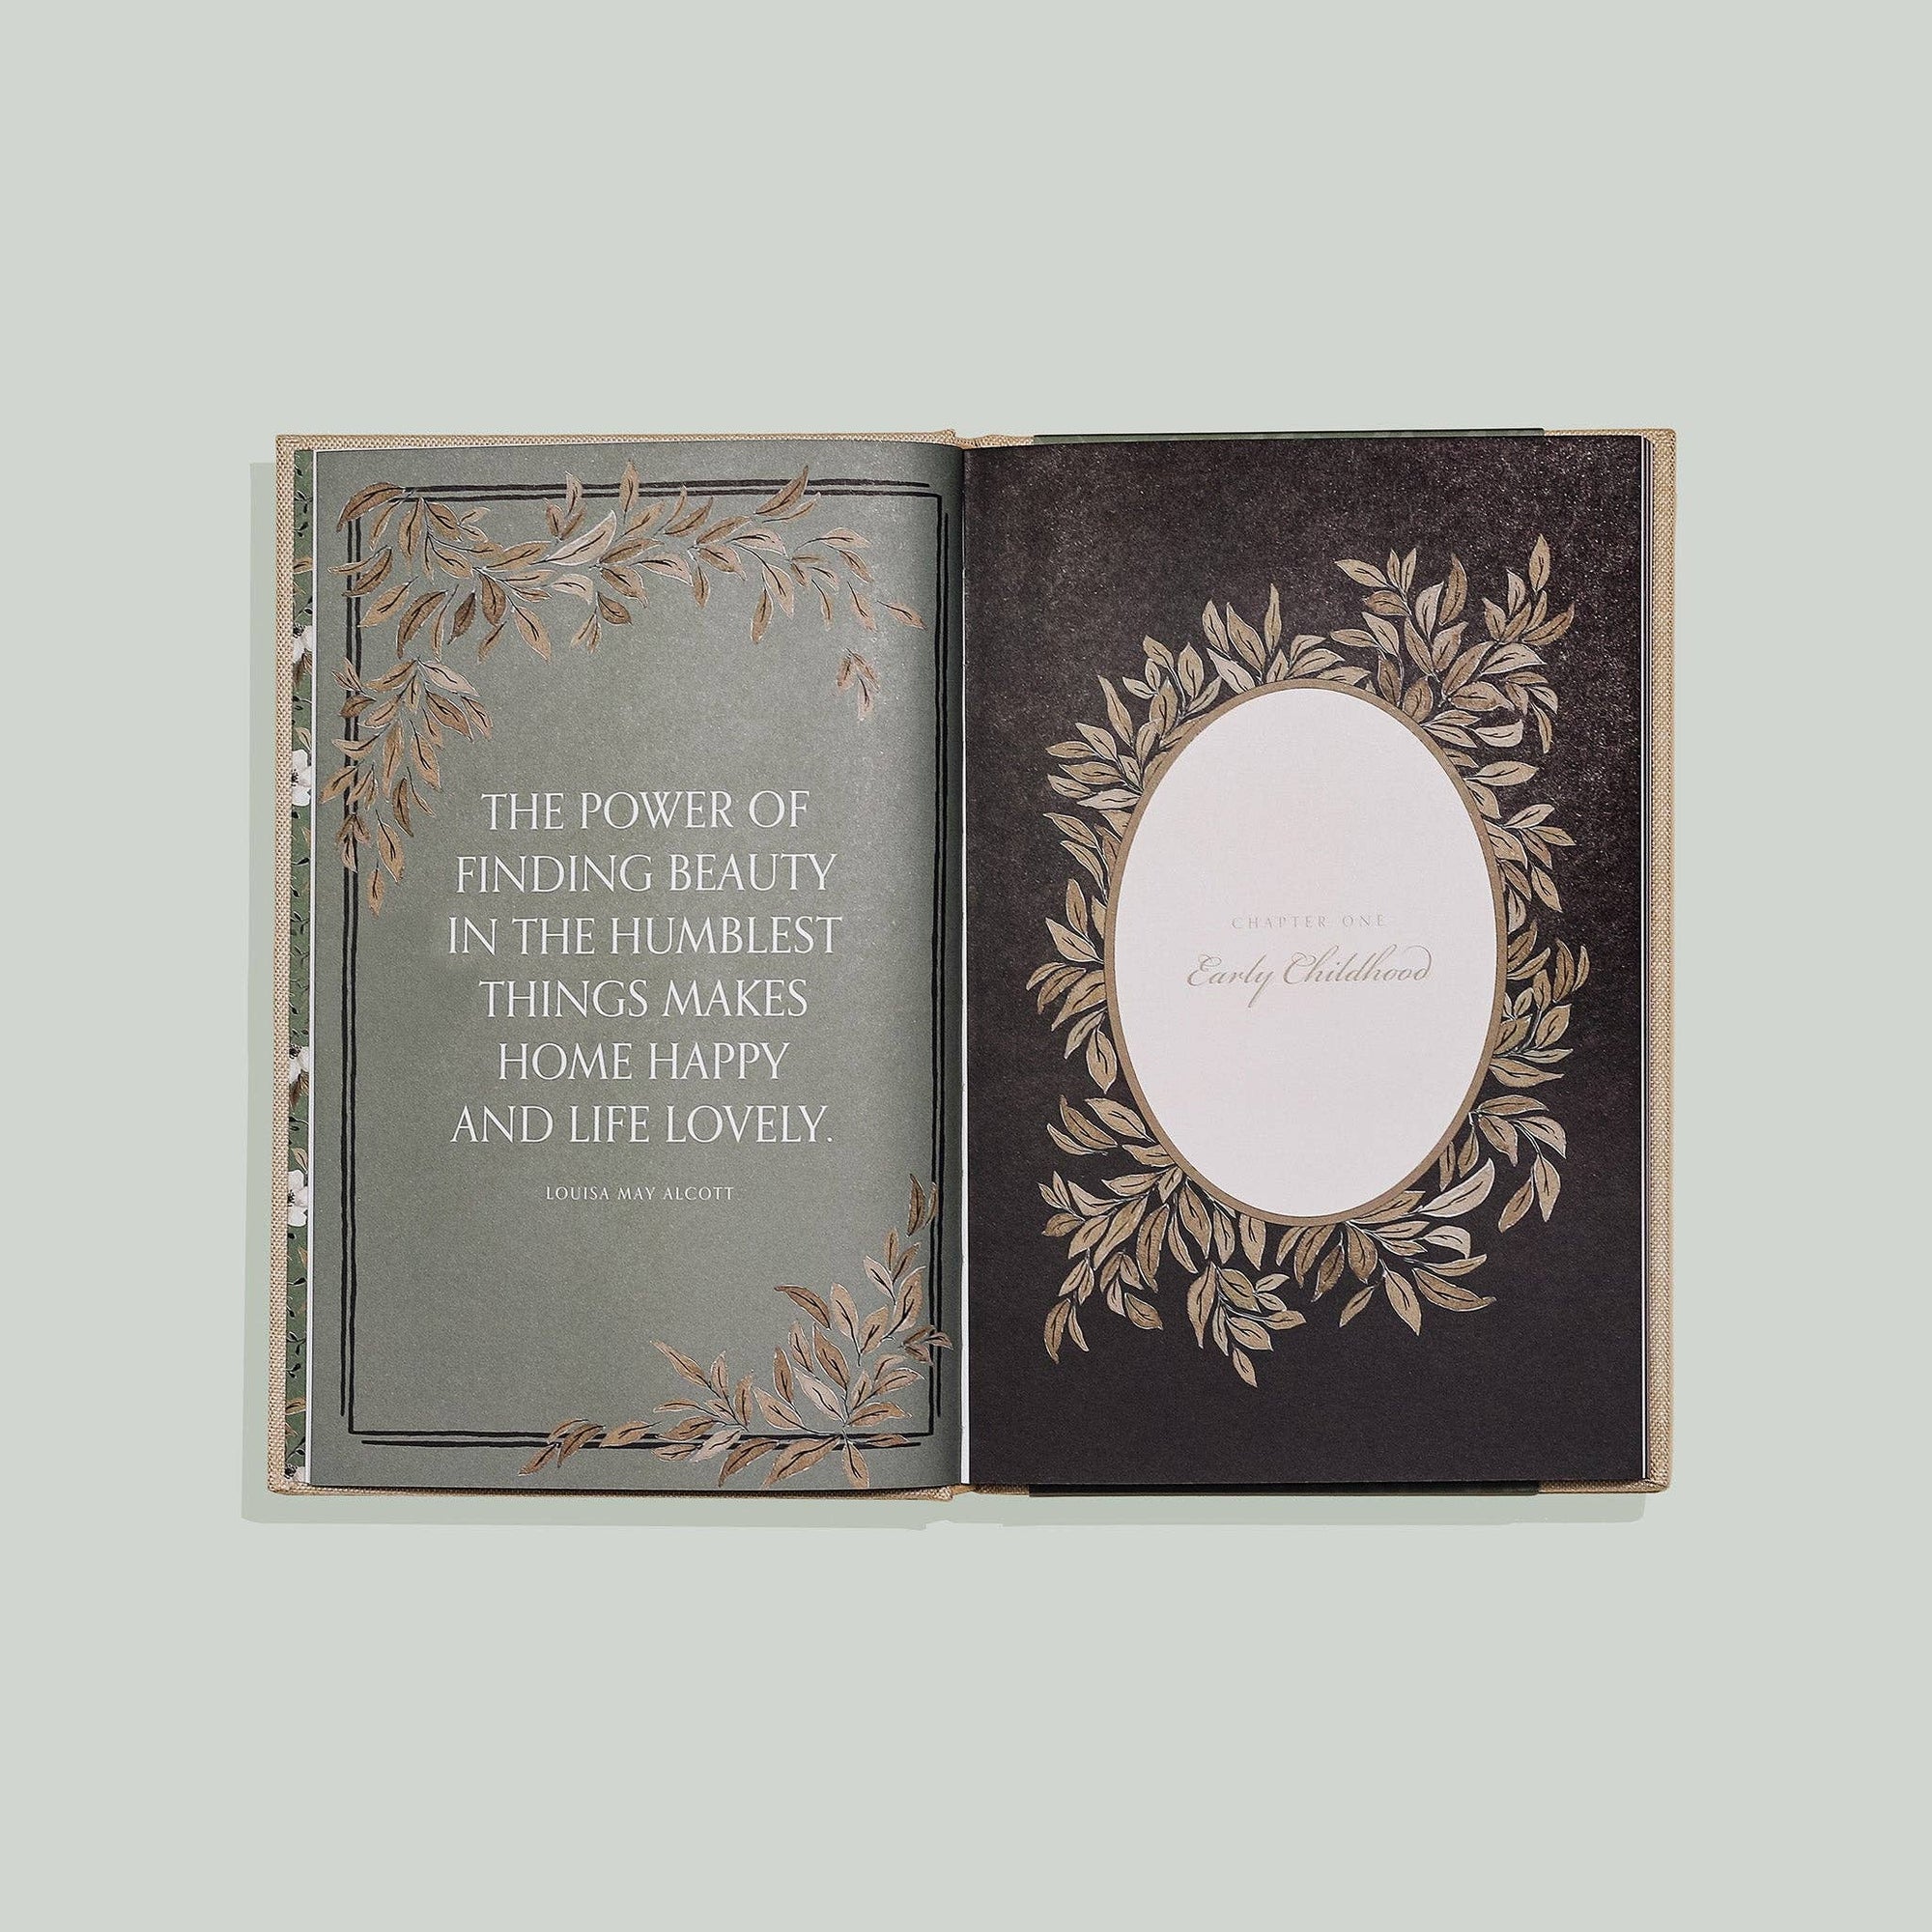 Grandma's Story: A Memory and Keepsake Journal for My Family, adorned with a heartfelt quote, perfect as a gift for Grandma.